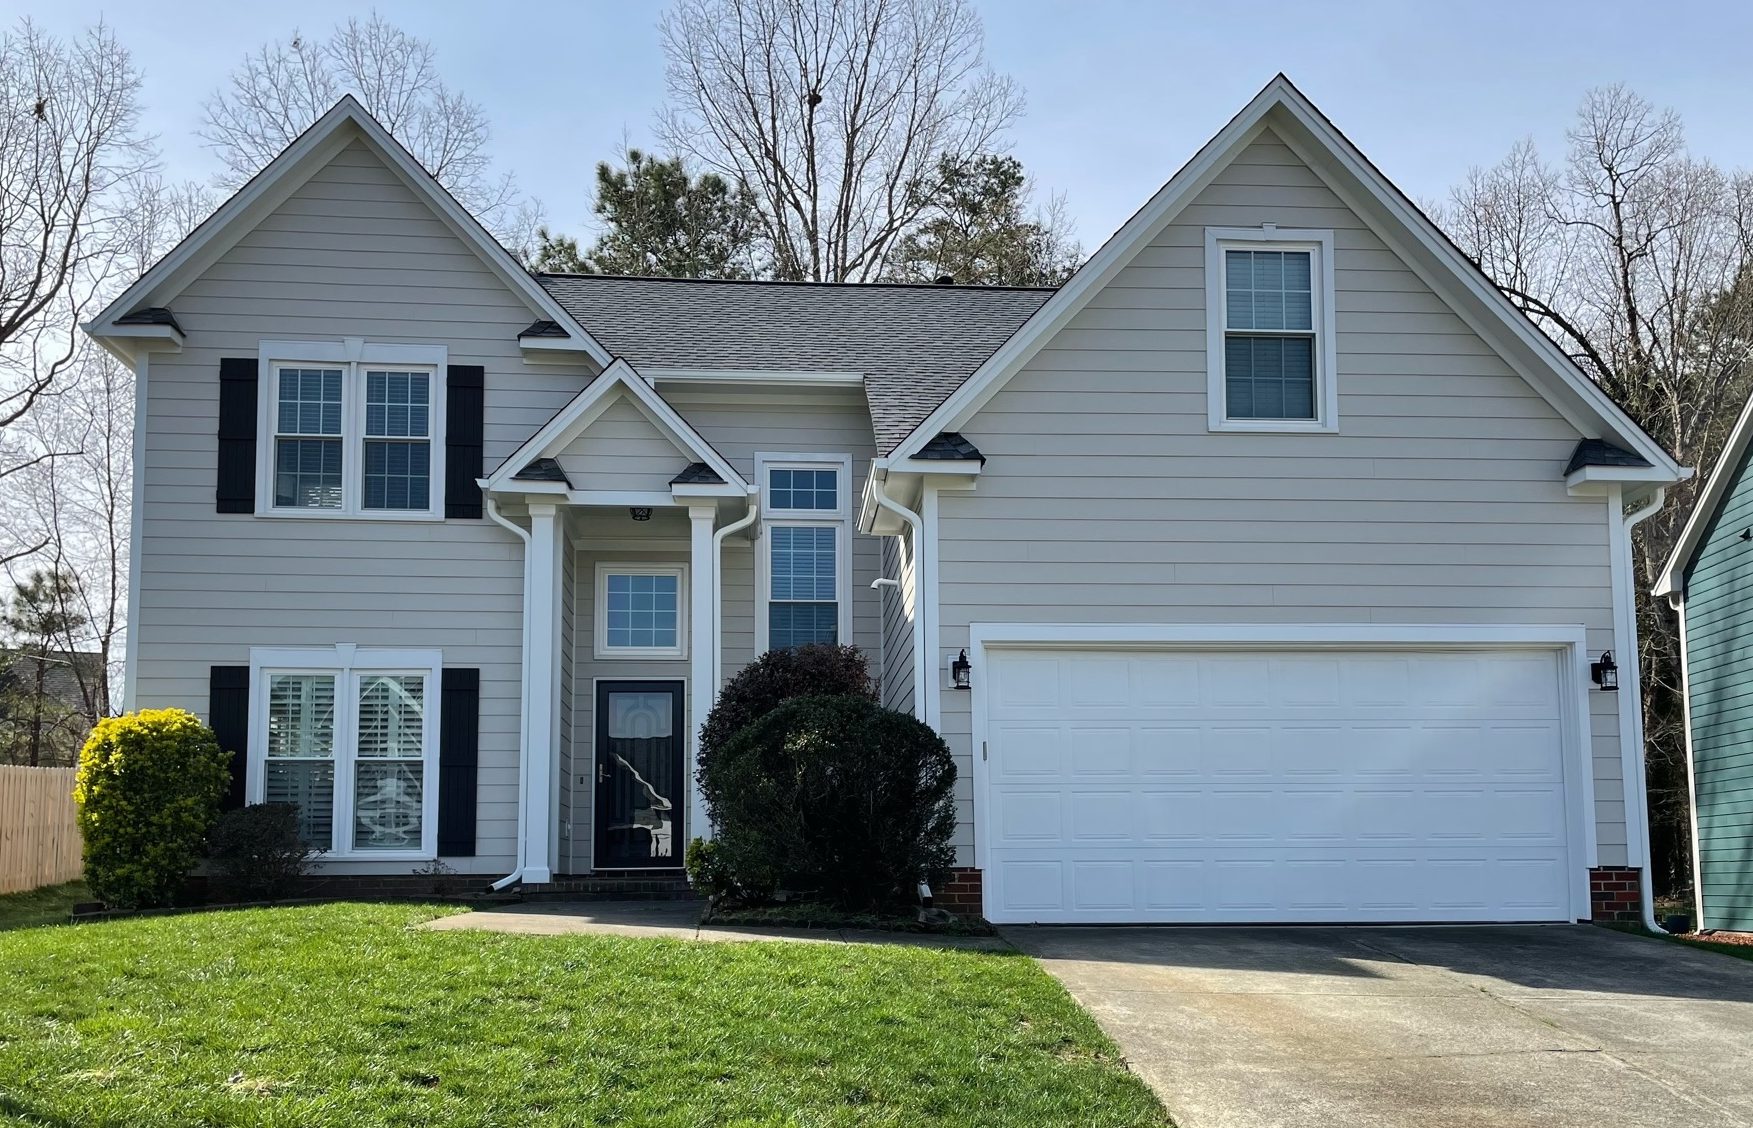 Raleigh, NC James Hardie Siding & Gutter Replacement